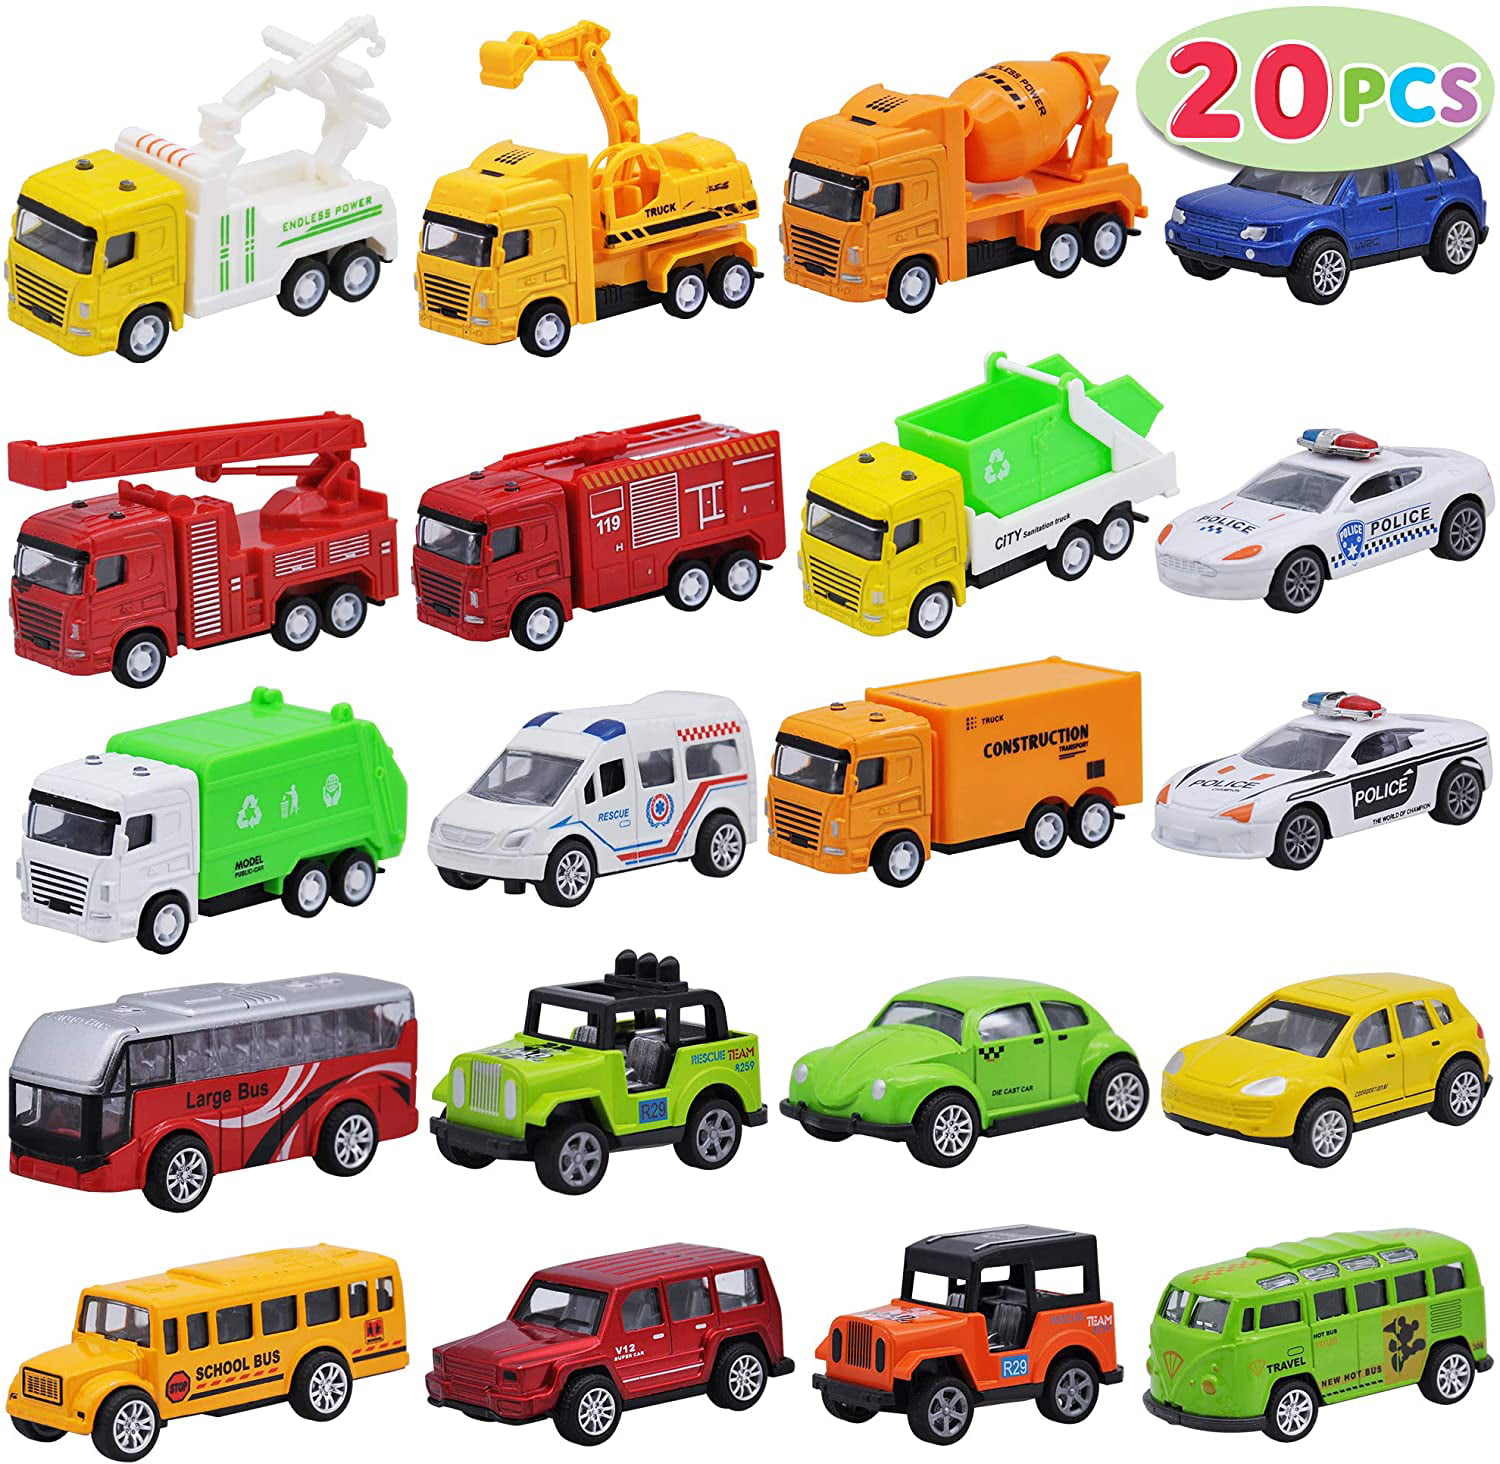 5 WISHTIME Pull Back Car Toy Set 6 Year Toddlers Kids Boys 9 pcs Assorted Mini Die Cast Vehicle Friction Powered City Car Playset for 3 4 